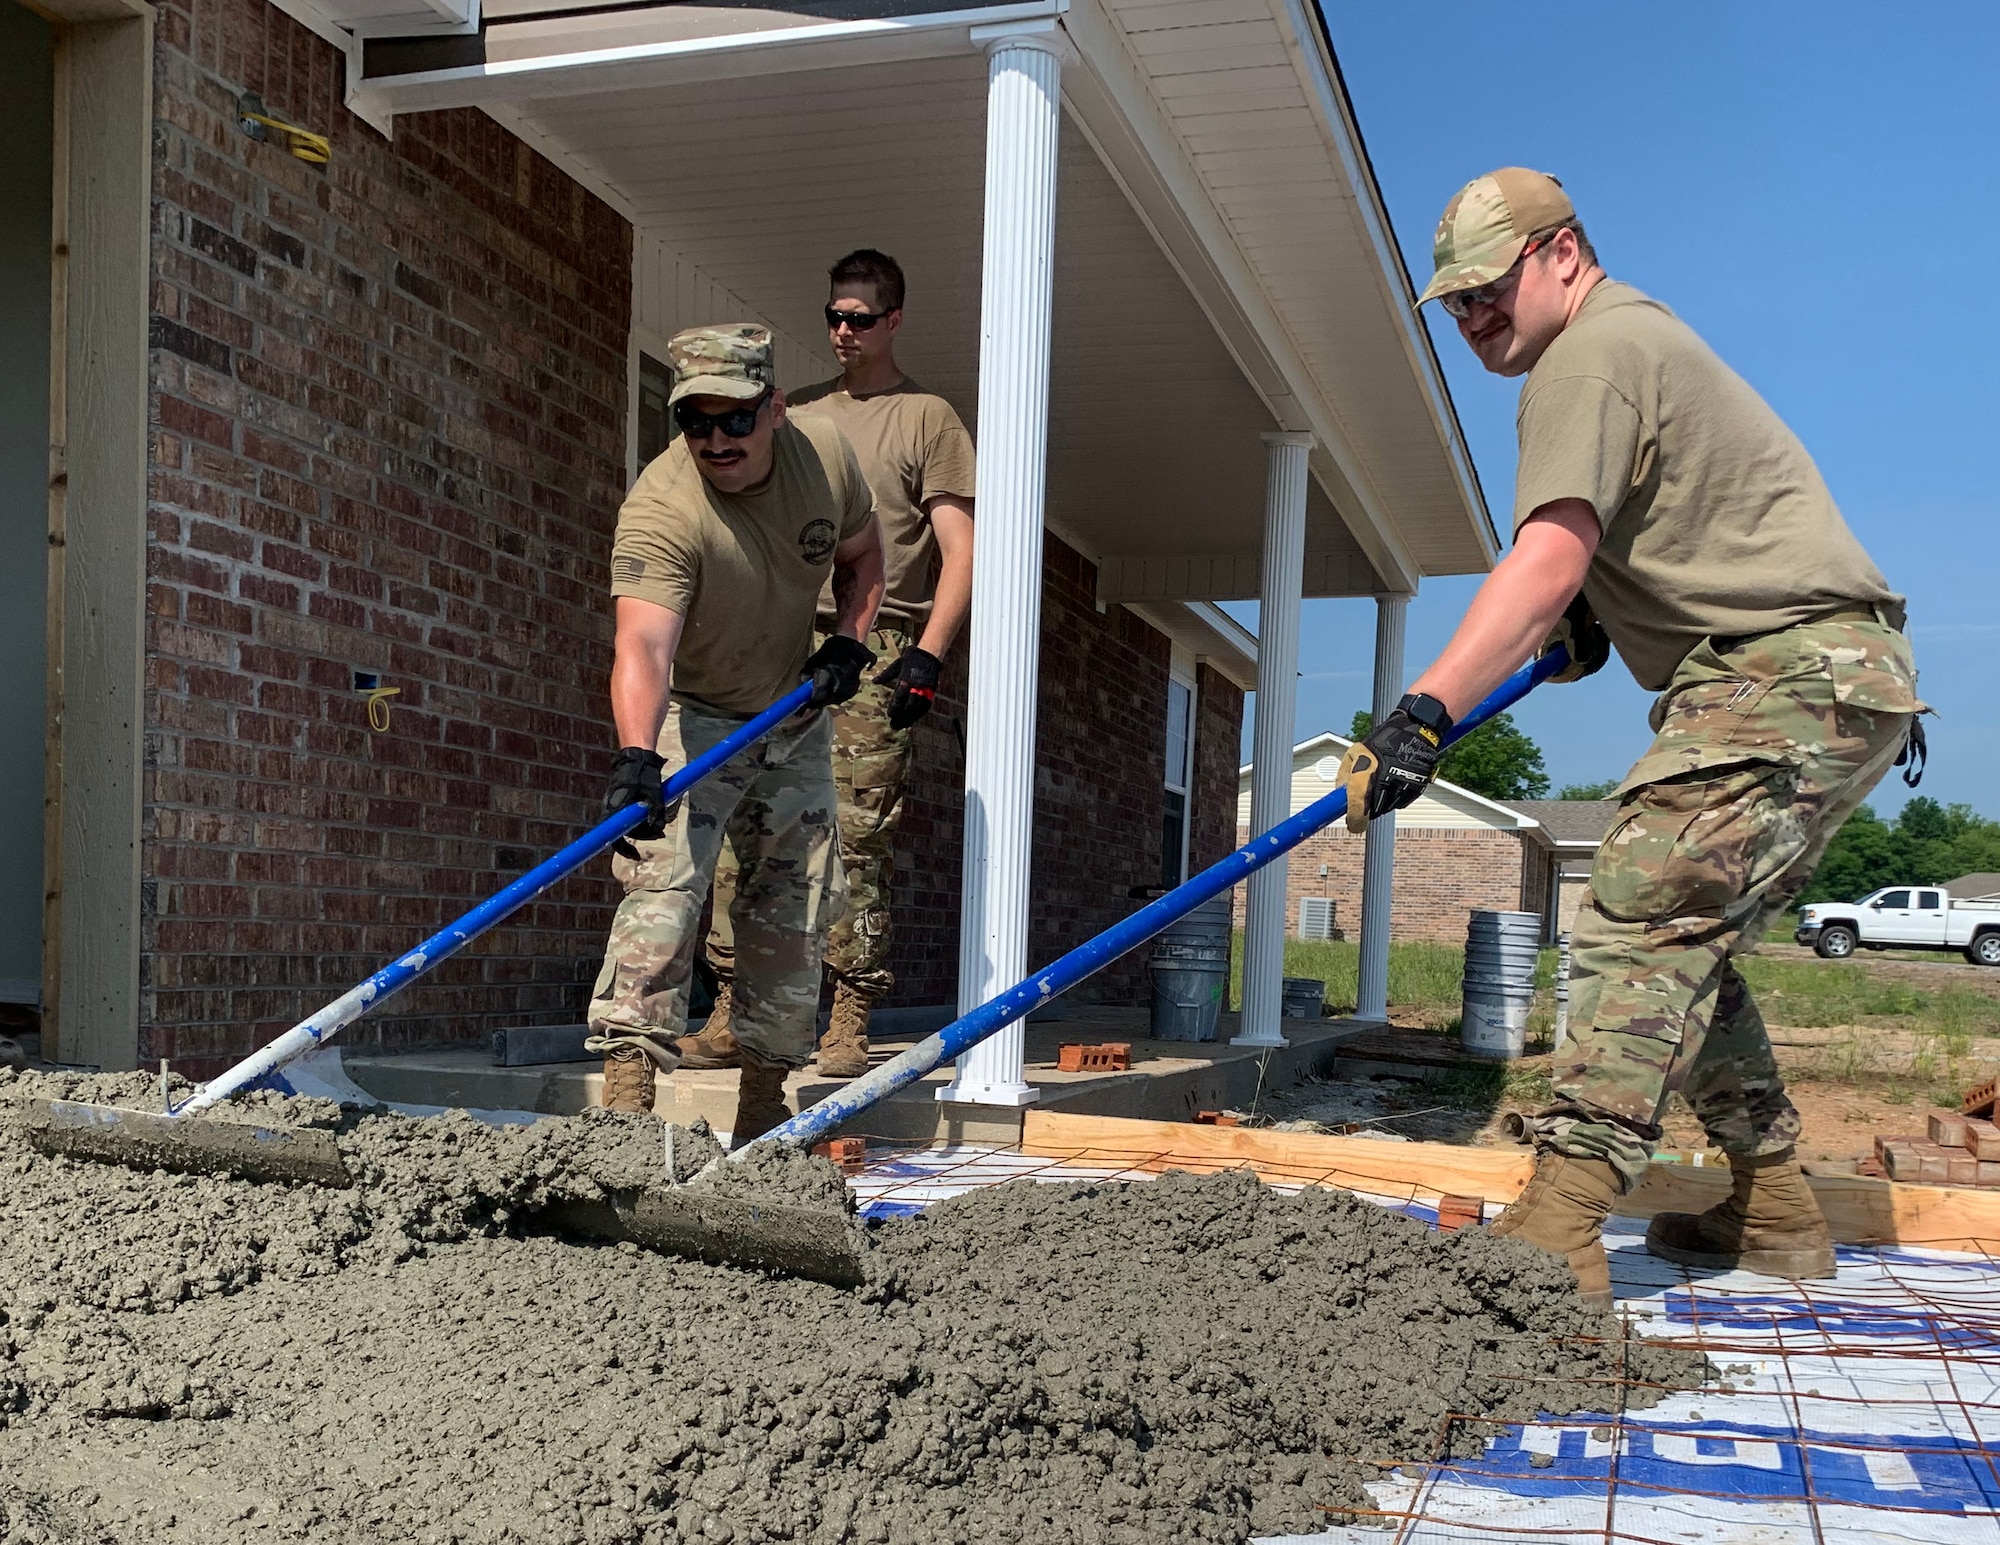 U.S. Air Force Senior Airman Mitchell Krogman and Airman 1st Class Travis, 133rd Civil Engineer Squadron, assisting with concrete pour in Tahlequah, Olka., May 22, 2023.